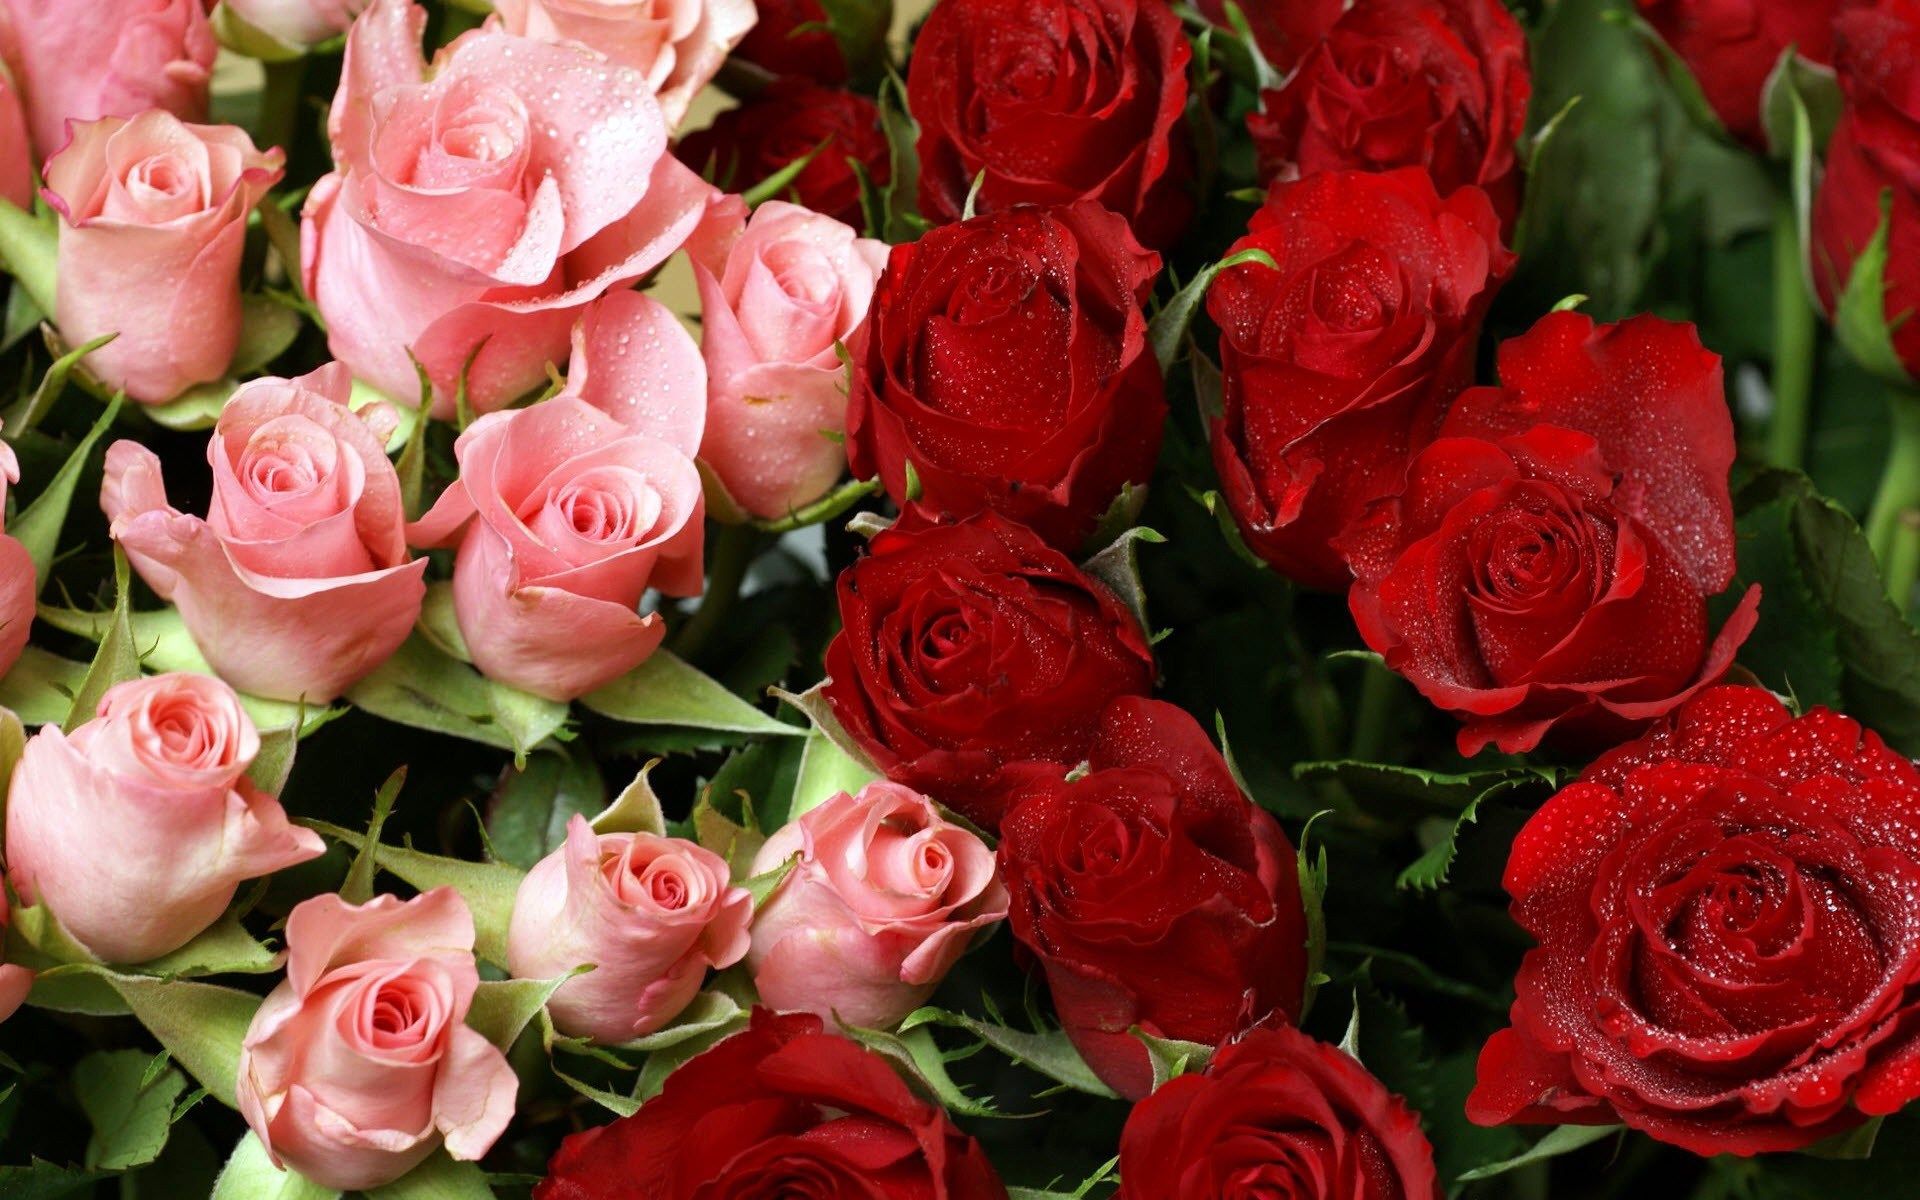 Pink & Red Roses Bouquet Wallpaper - [1920 x 1200]